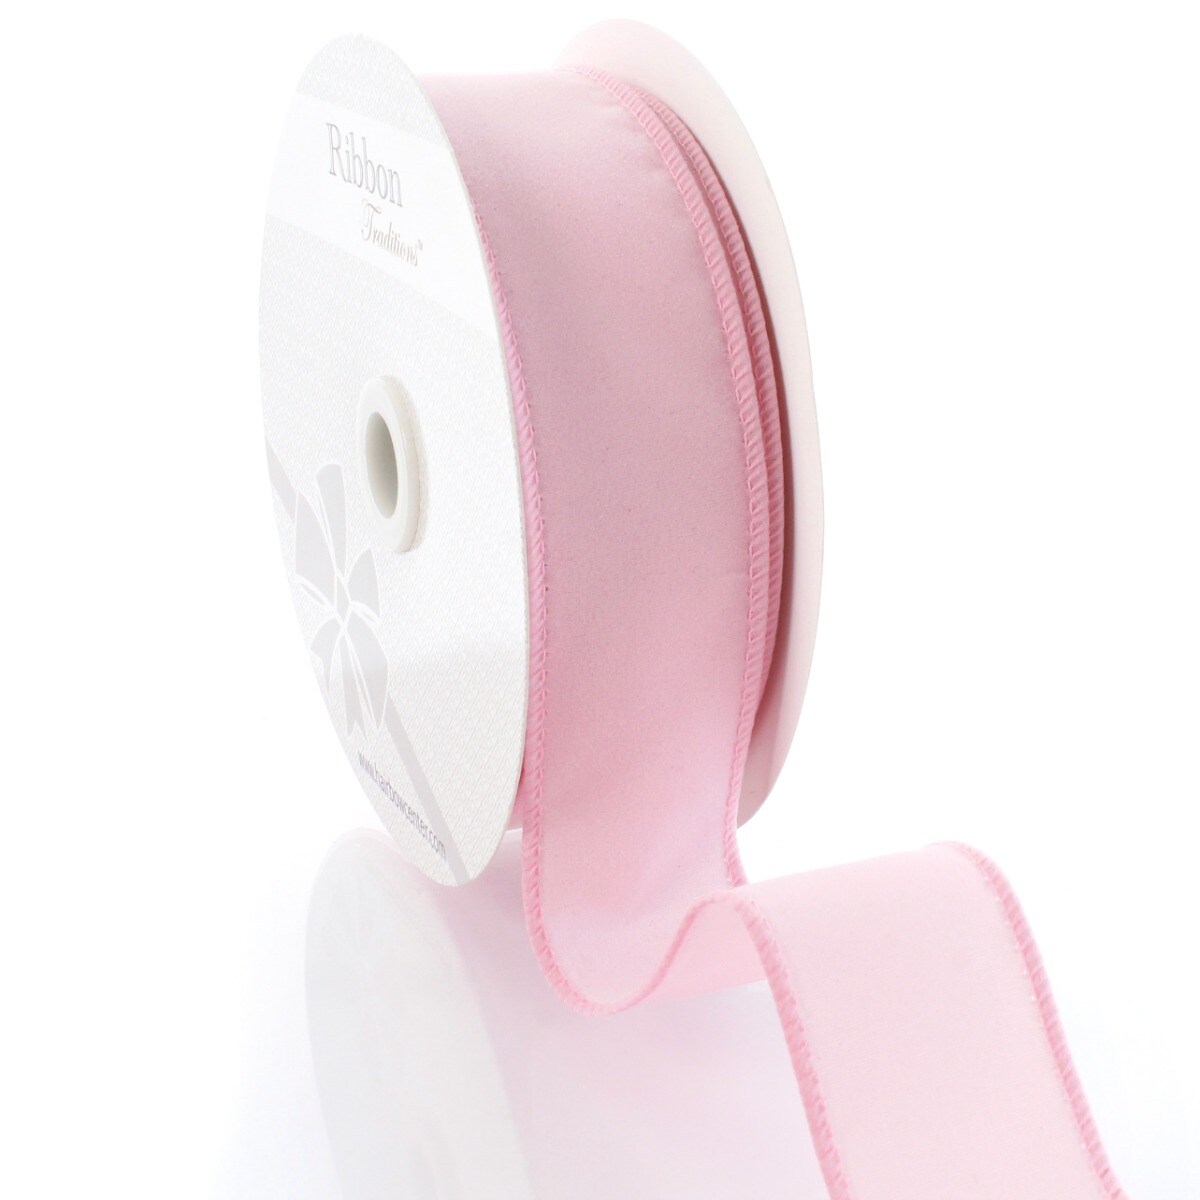 Jeuhoue Velvet Ribbon Light Pink,1 Inch x 20Yd,Perfect for